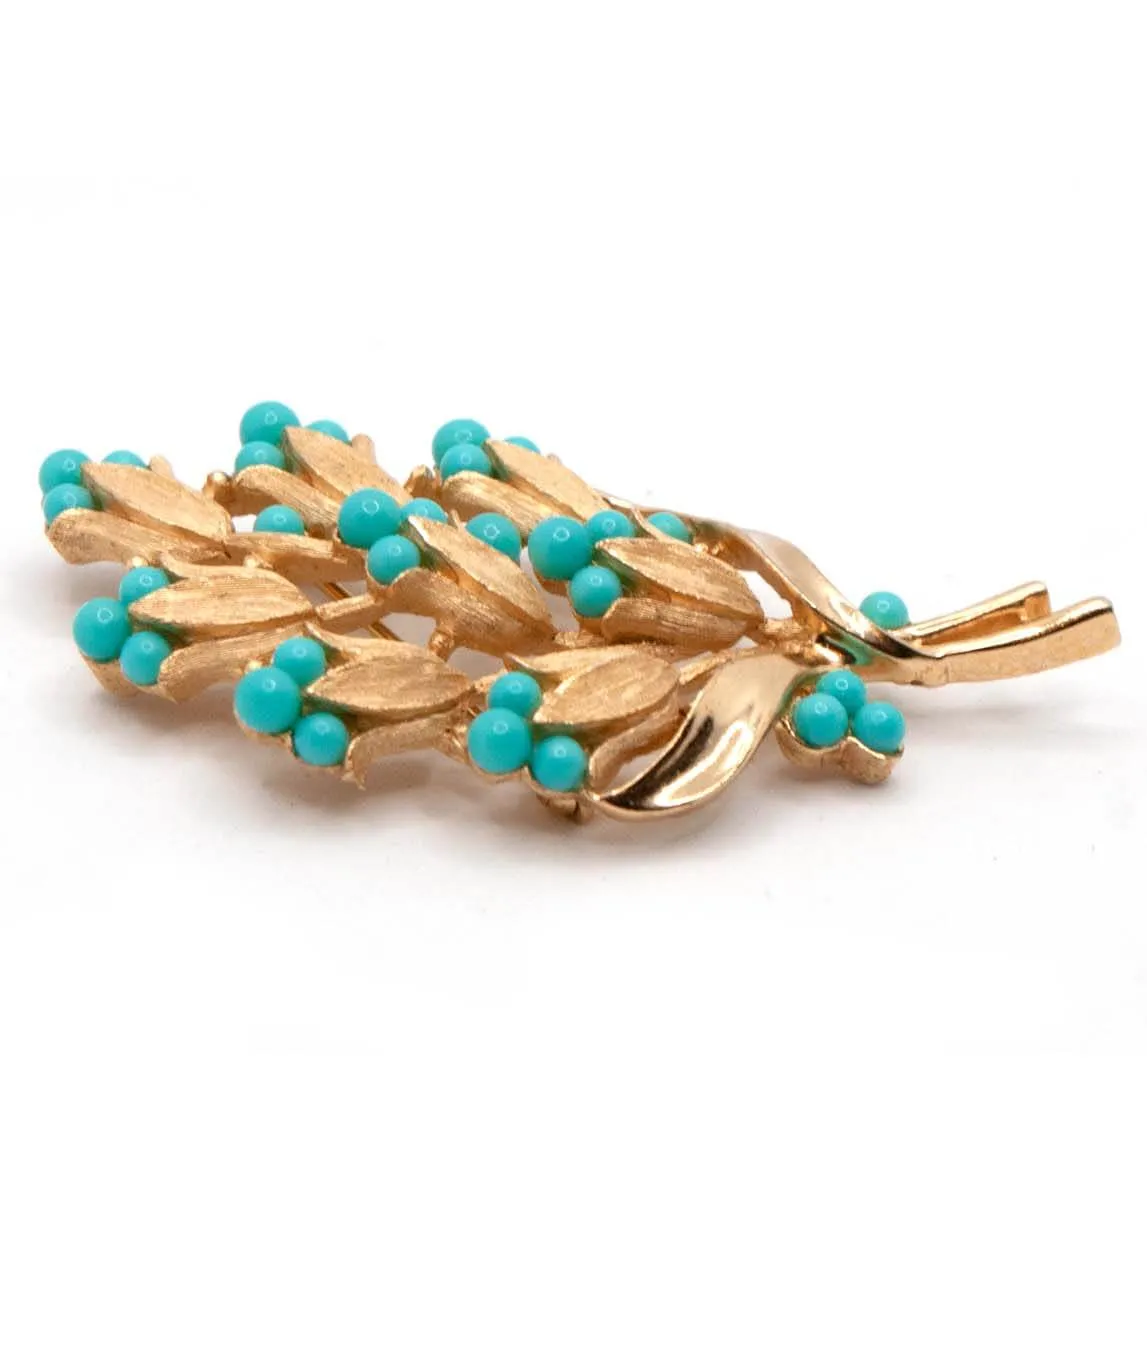 Vintage Trifari floral brooch in gold tone with turquoise beads side view